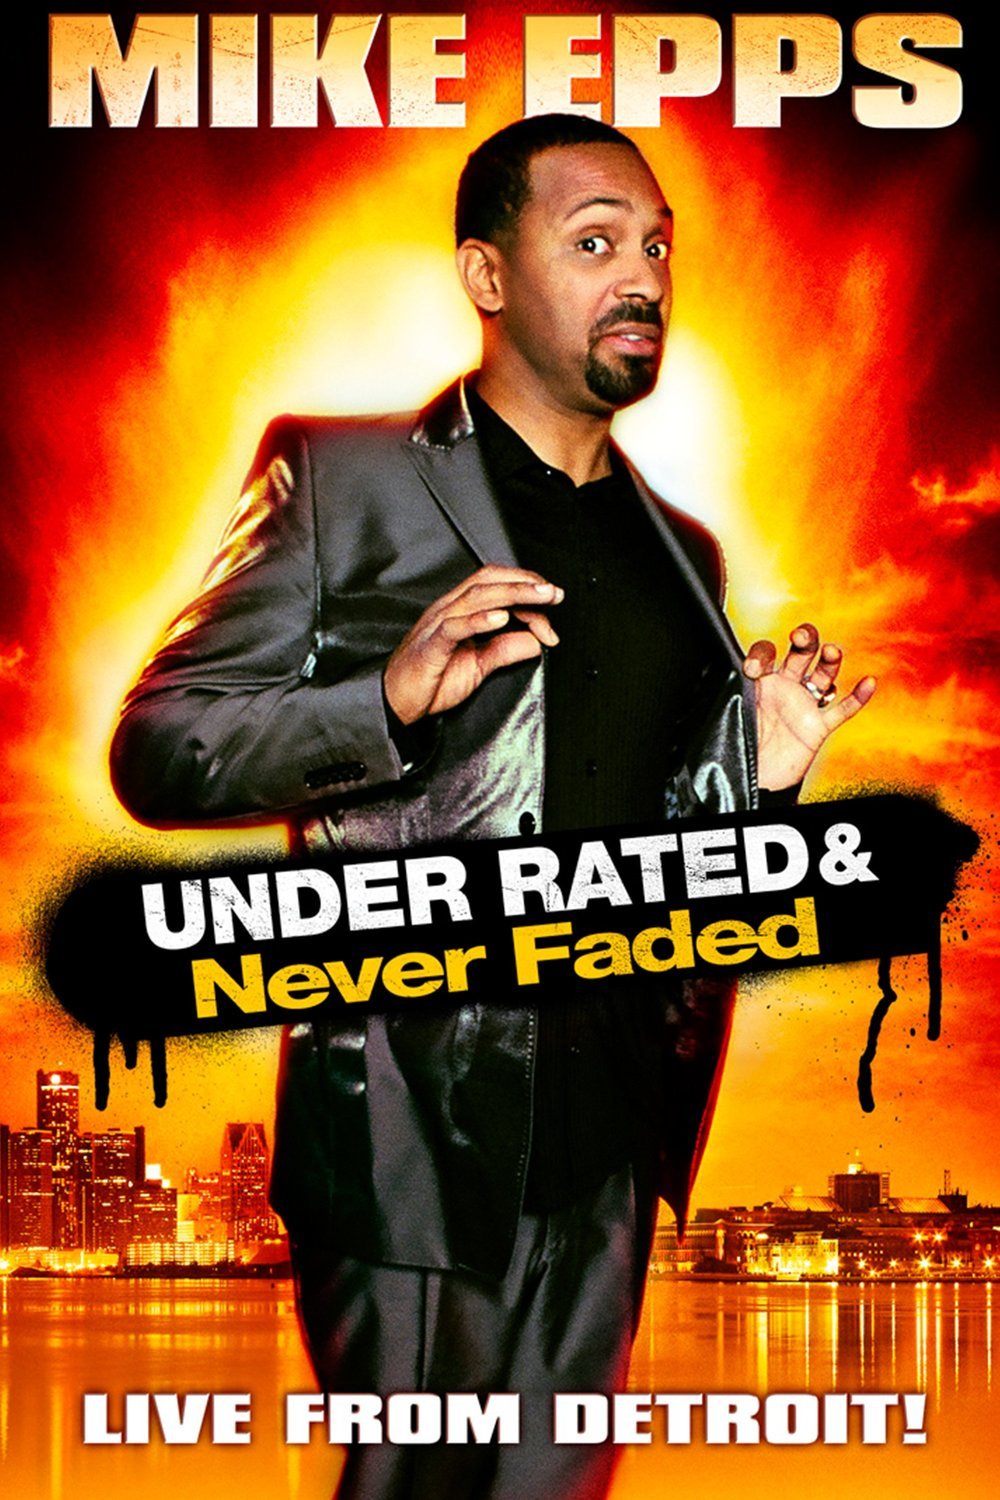 L'affiche du film Mike Epps: Under Rated & Never Faded